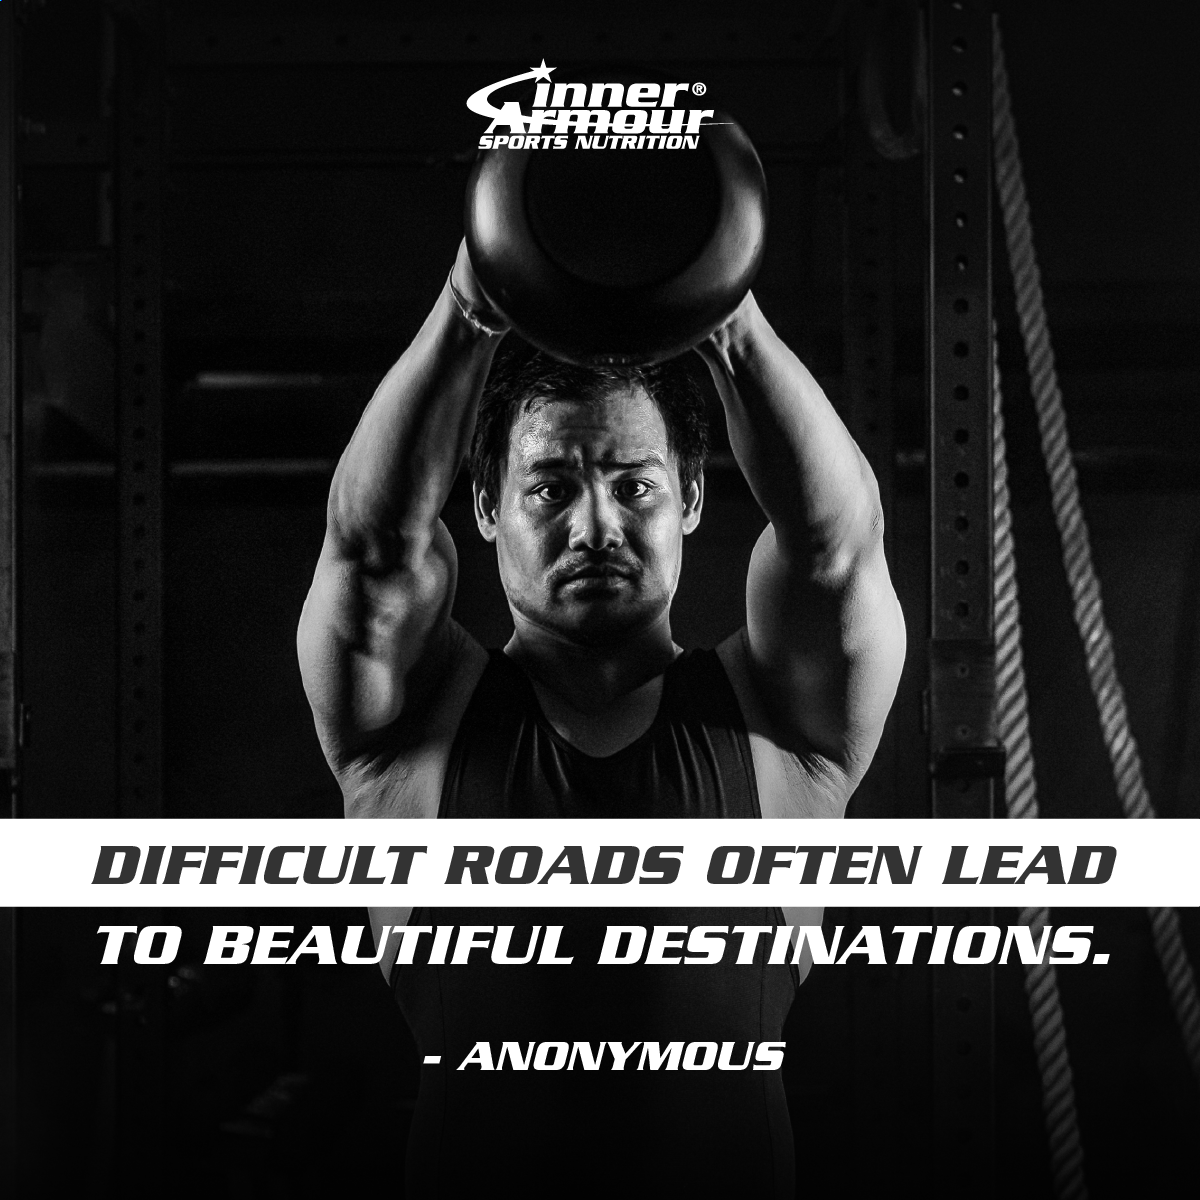 Difficult roads often lead to beautiful destinations. - Anonymous #InnerArmour #StrengthFromWithin #sportsnutrition #indisputableresults